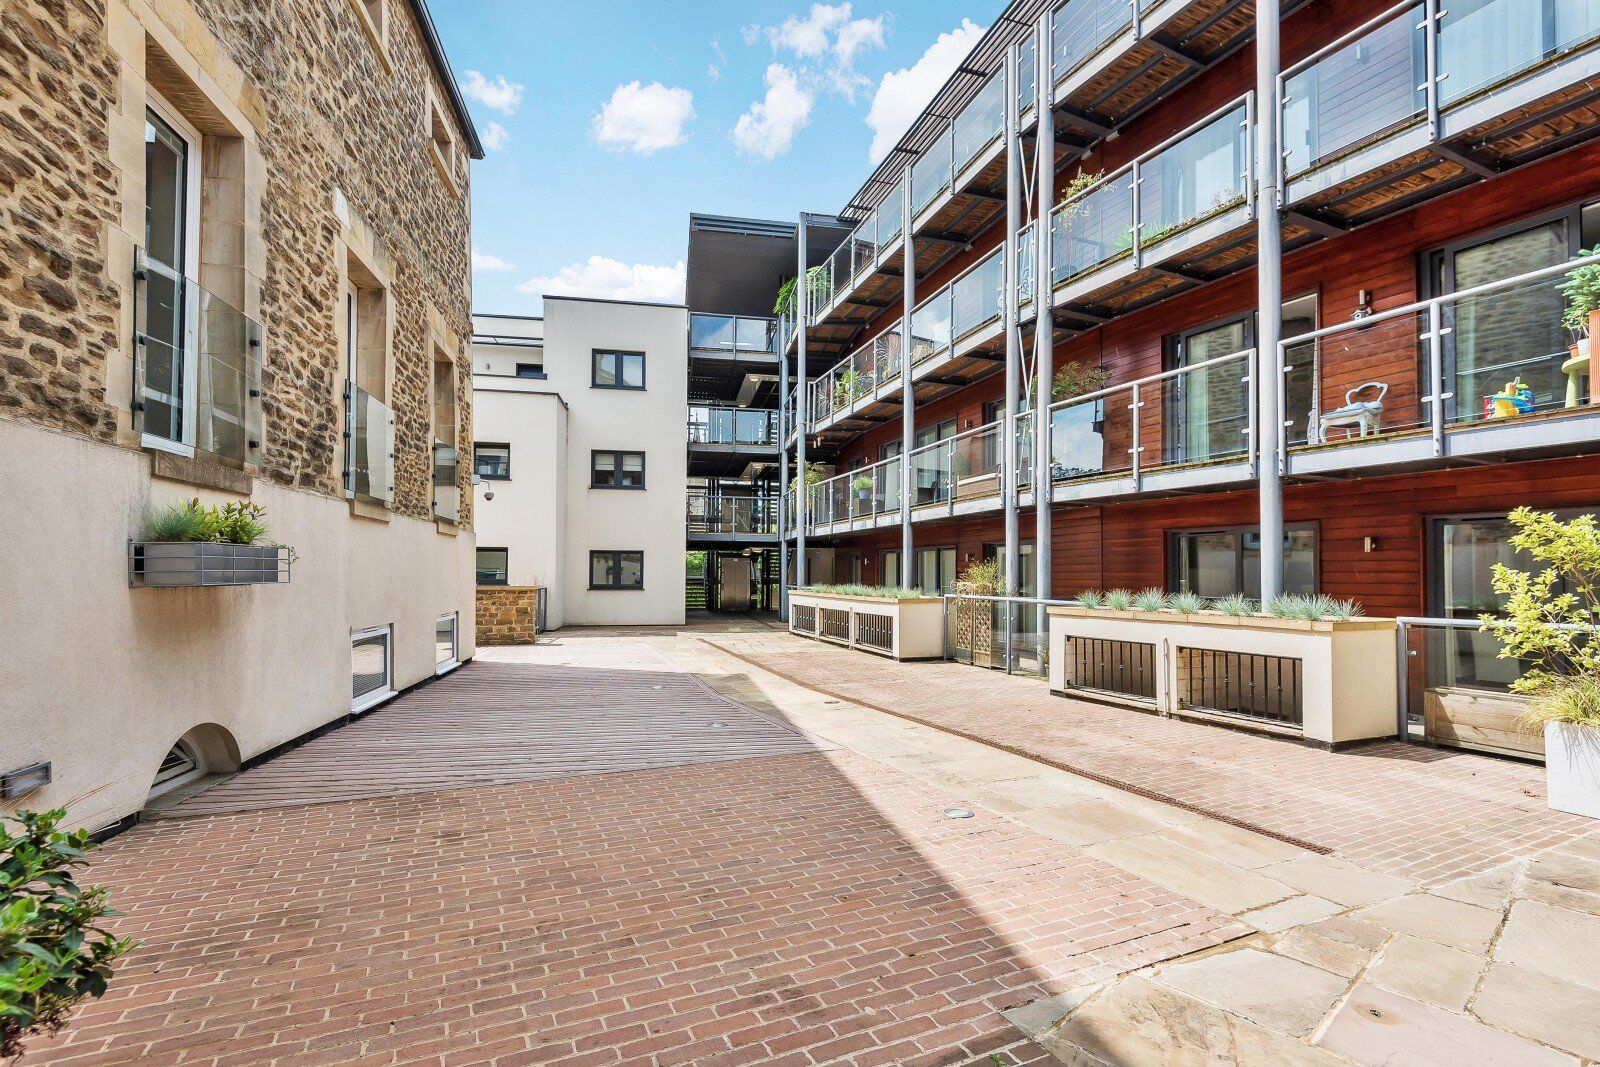 2 bedroom  flat for sale The Old Gaol, Abingdon, OX14, main image